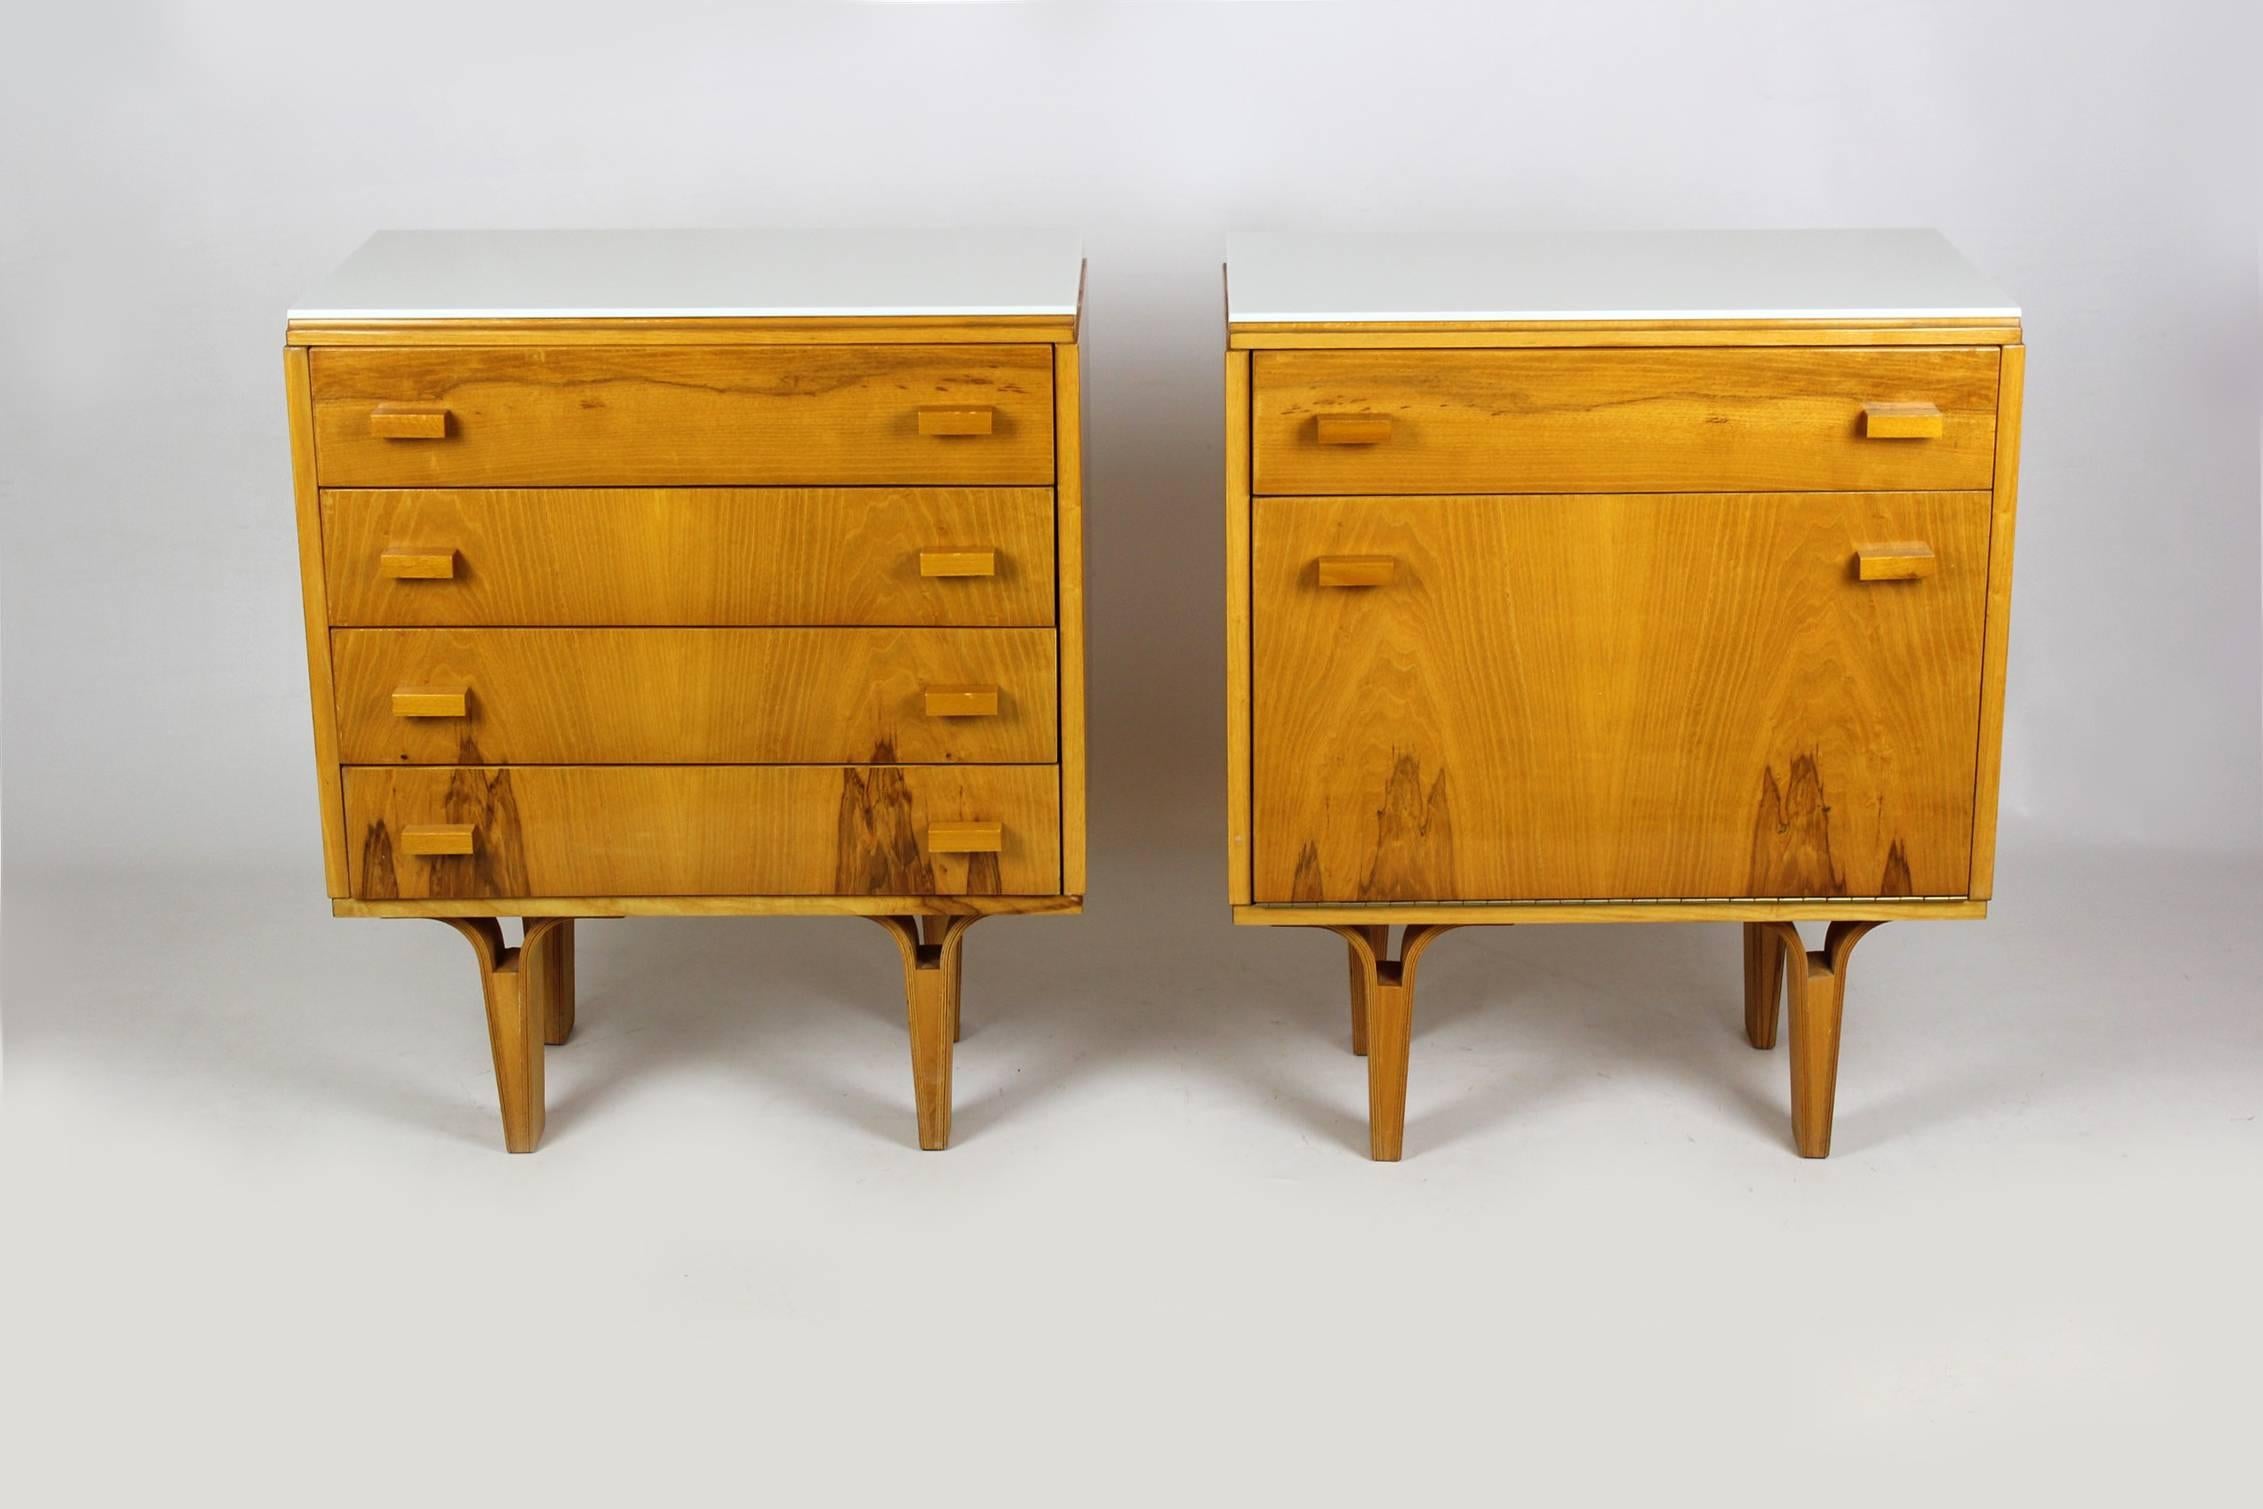 Pair of vintage nightstands, manufactured by Nový domov NP in the 1960s-1970s.
Features original white glass tops. Legs are made from bent plywood. Kept in original, very good condition.